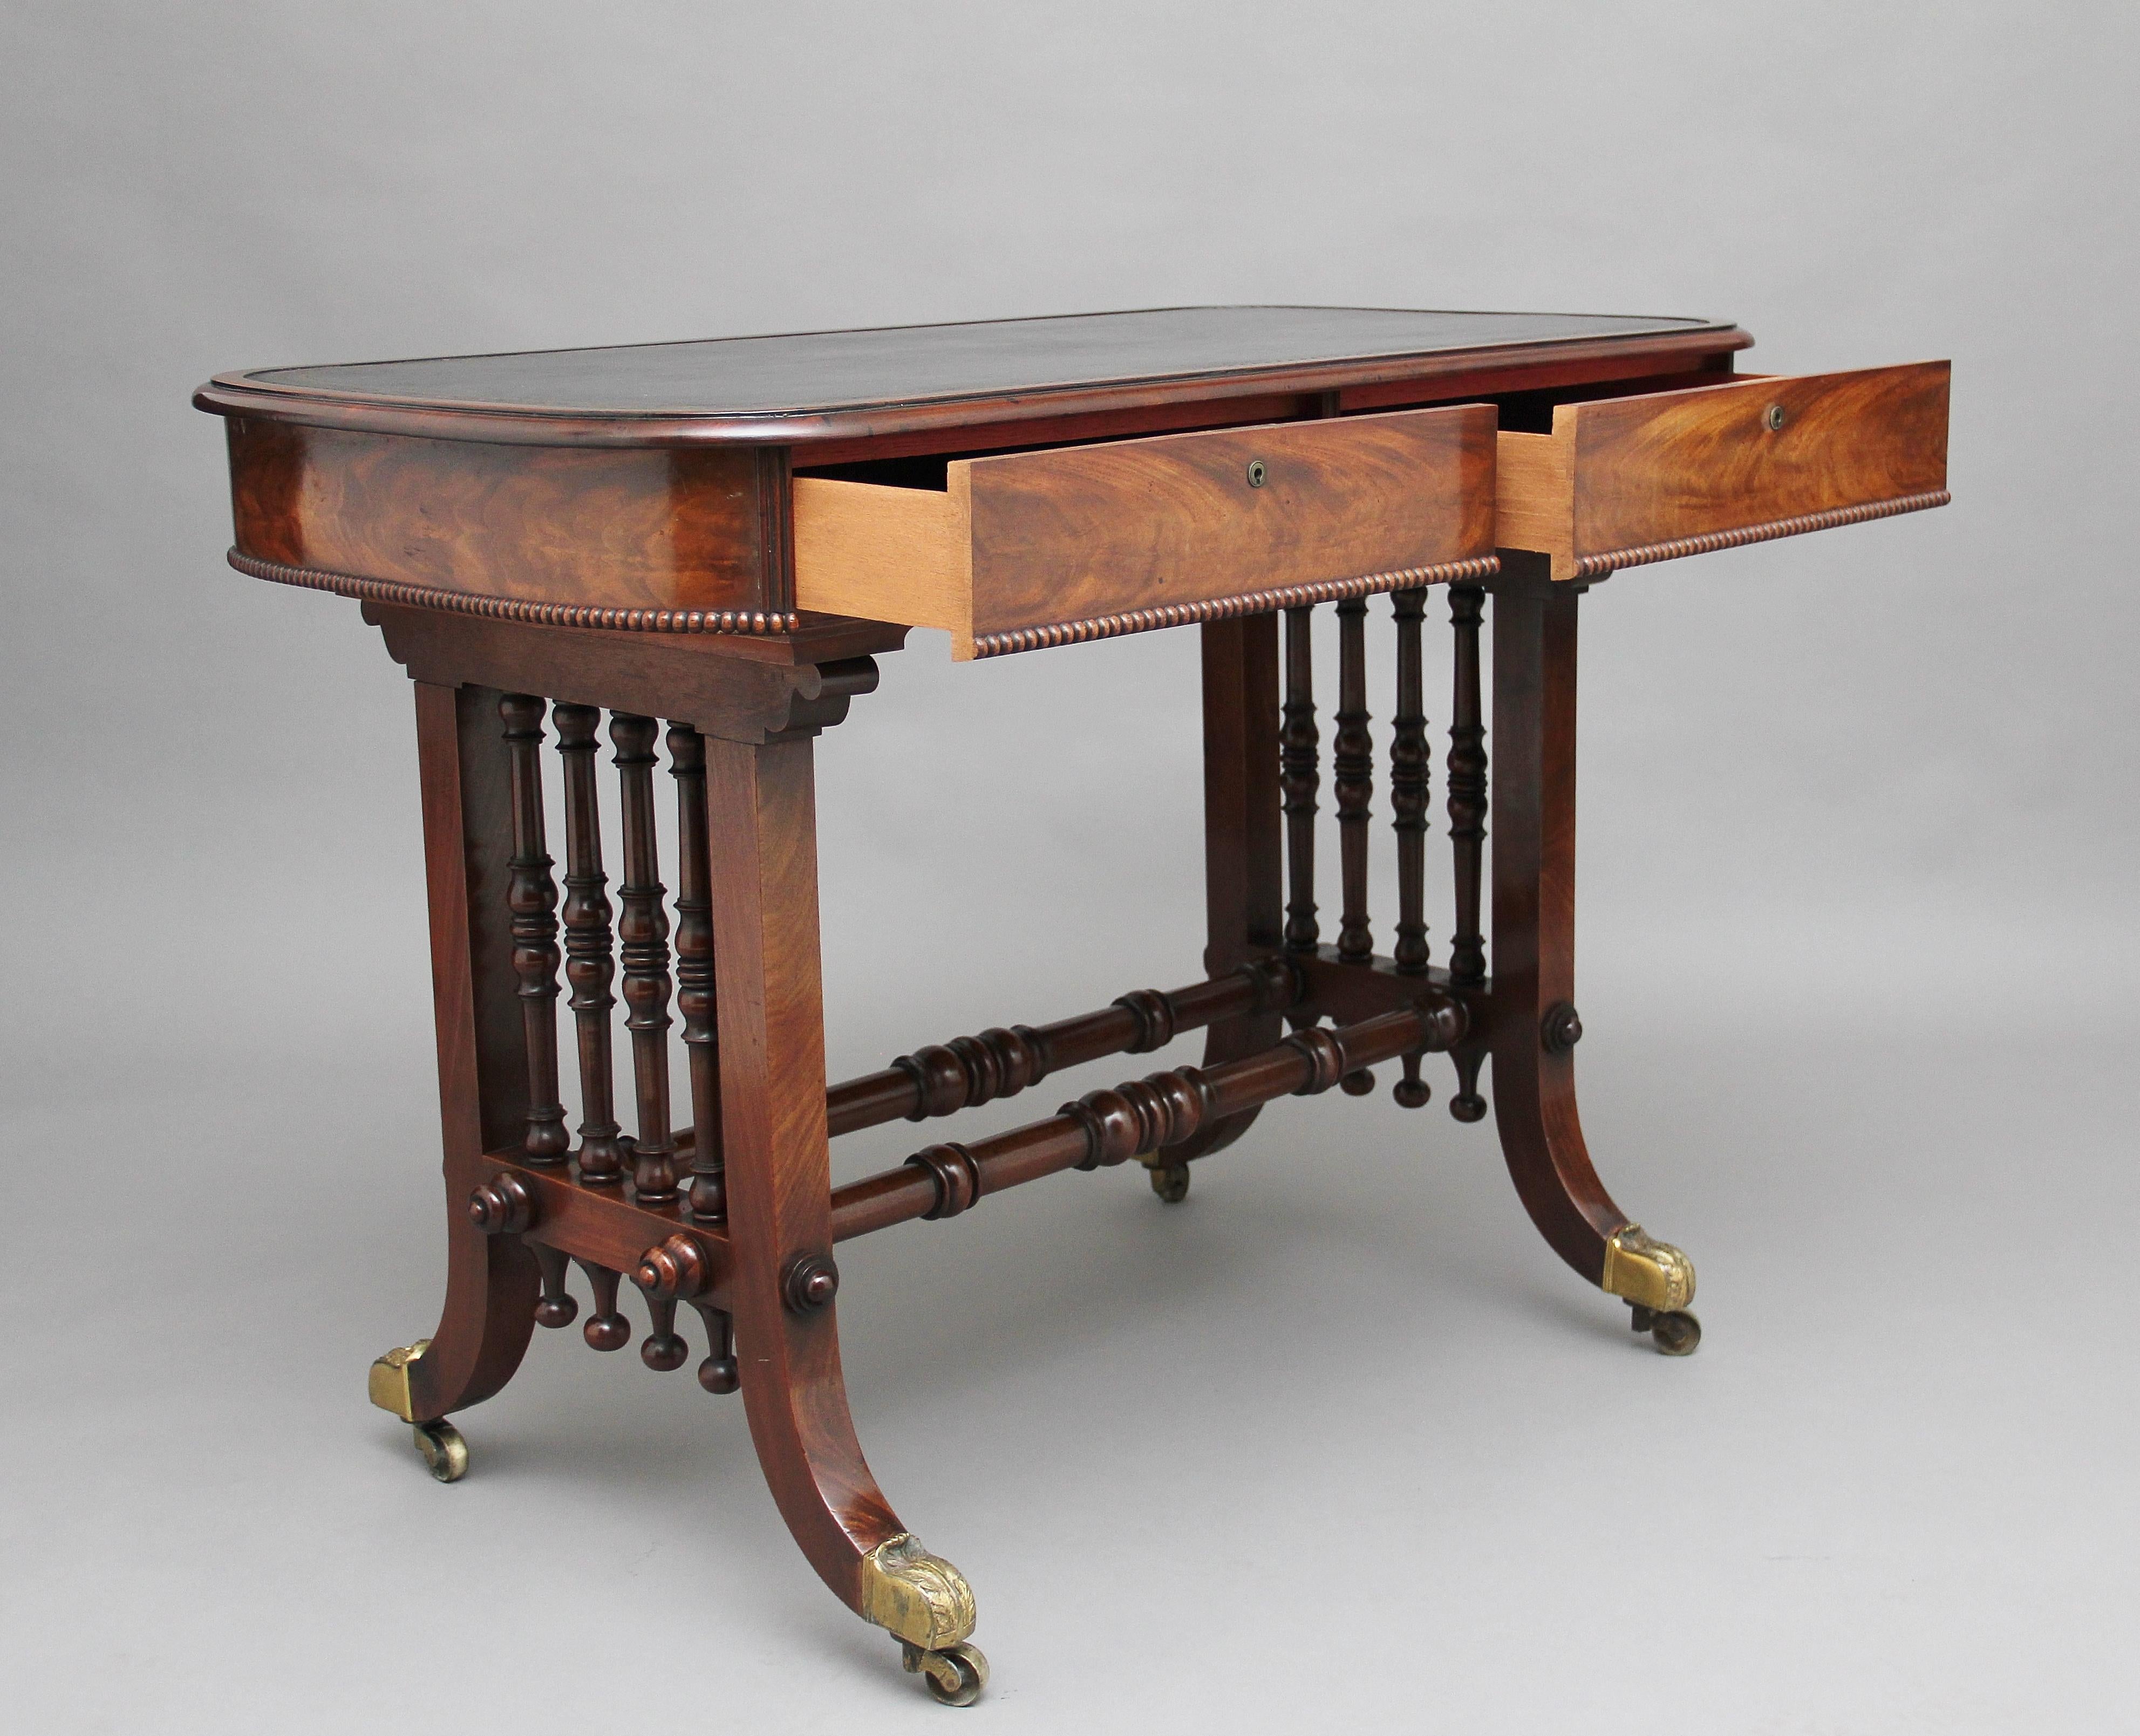 Early 19th century mahogany writing table, the oval shaped top having a moulded edge, green leather writing surface decorated with blind and gold tooling, two mahogany lined frieze drawers below with carved bead decoration running along the bottom